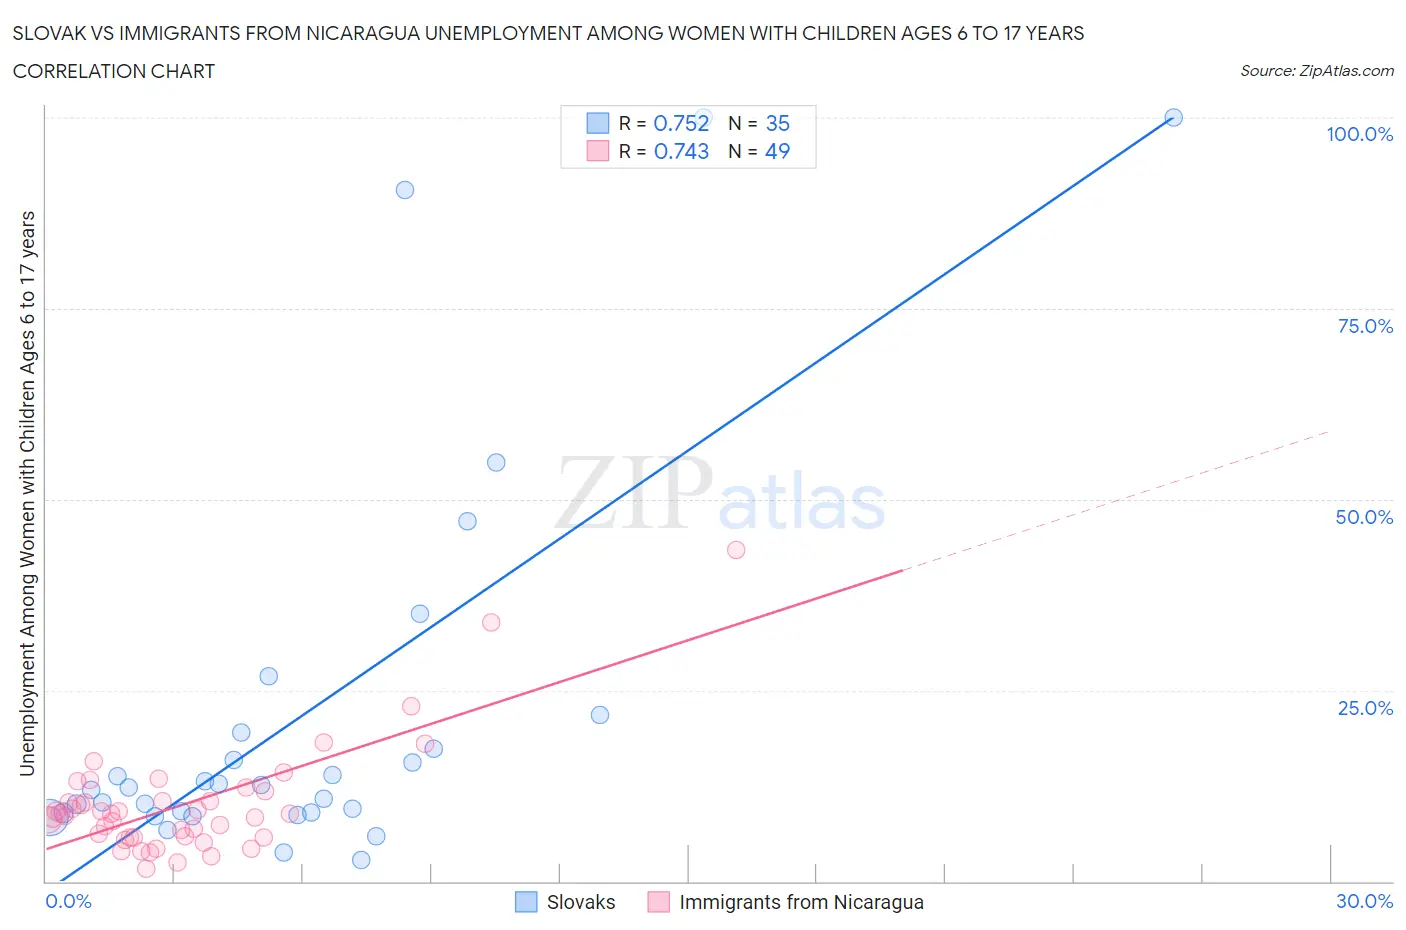 Slovak vs Immigrants from Nicaragua Unemployment Among Women with Children Ages 6 to 17 years